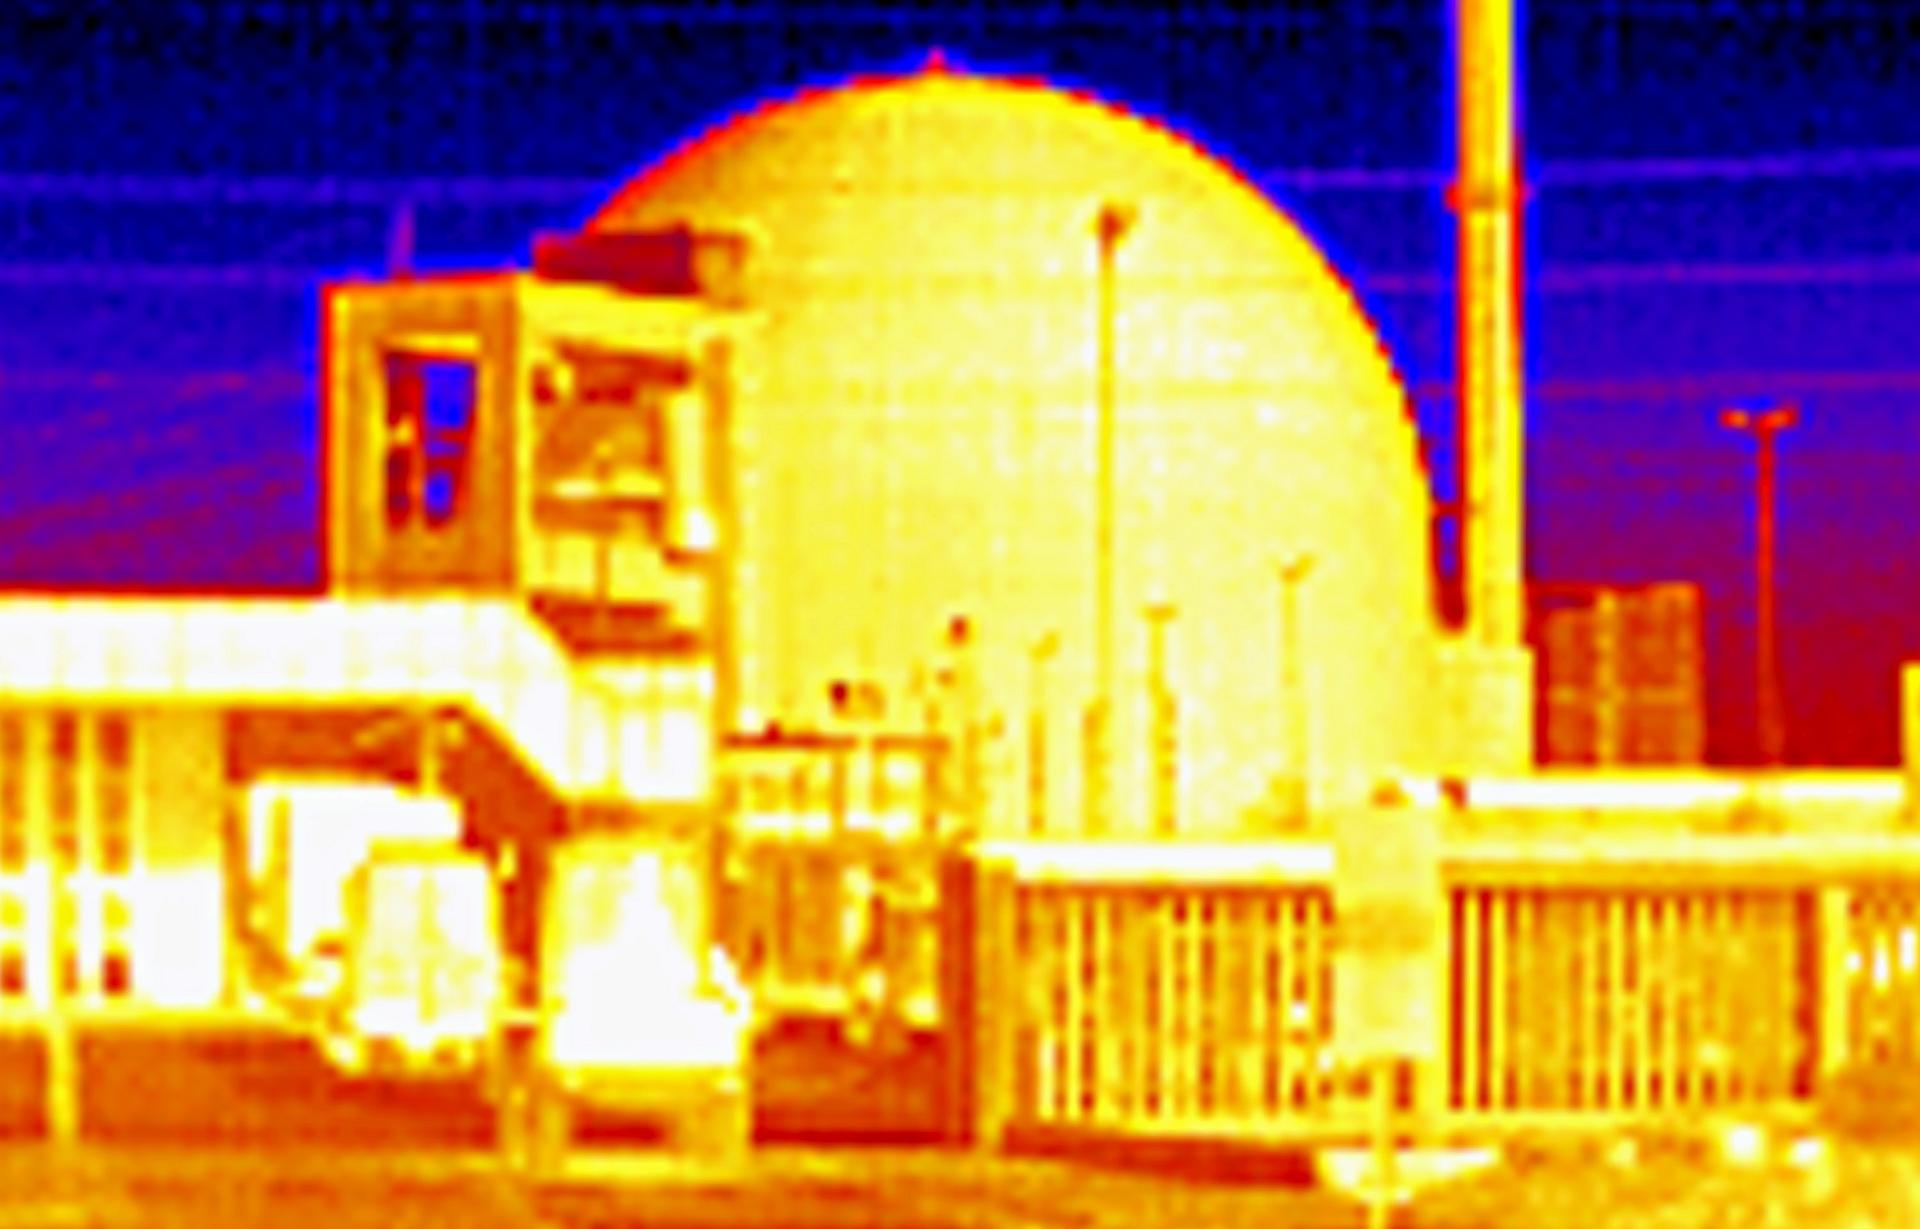 An image taken with a thermal camera shows the shutdown of a nuclear power plant in Germany. The picture does not show any temperature difference outside the power plant.